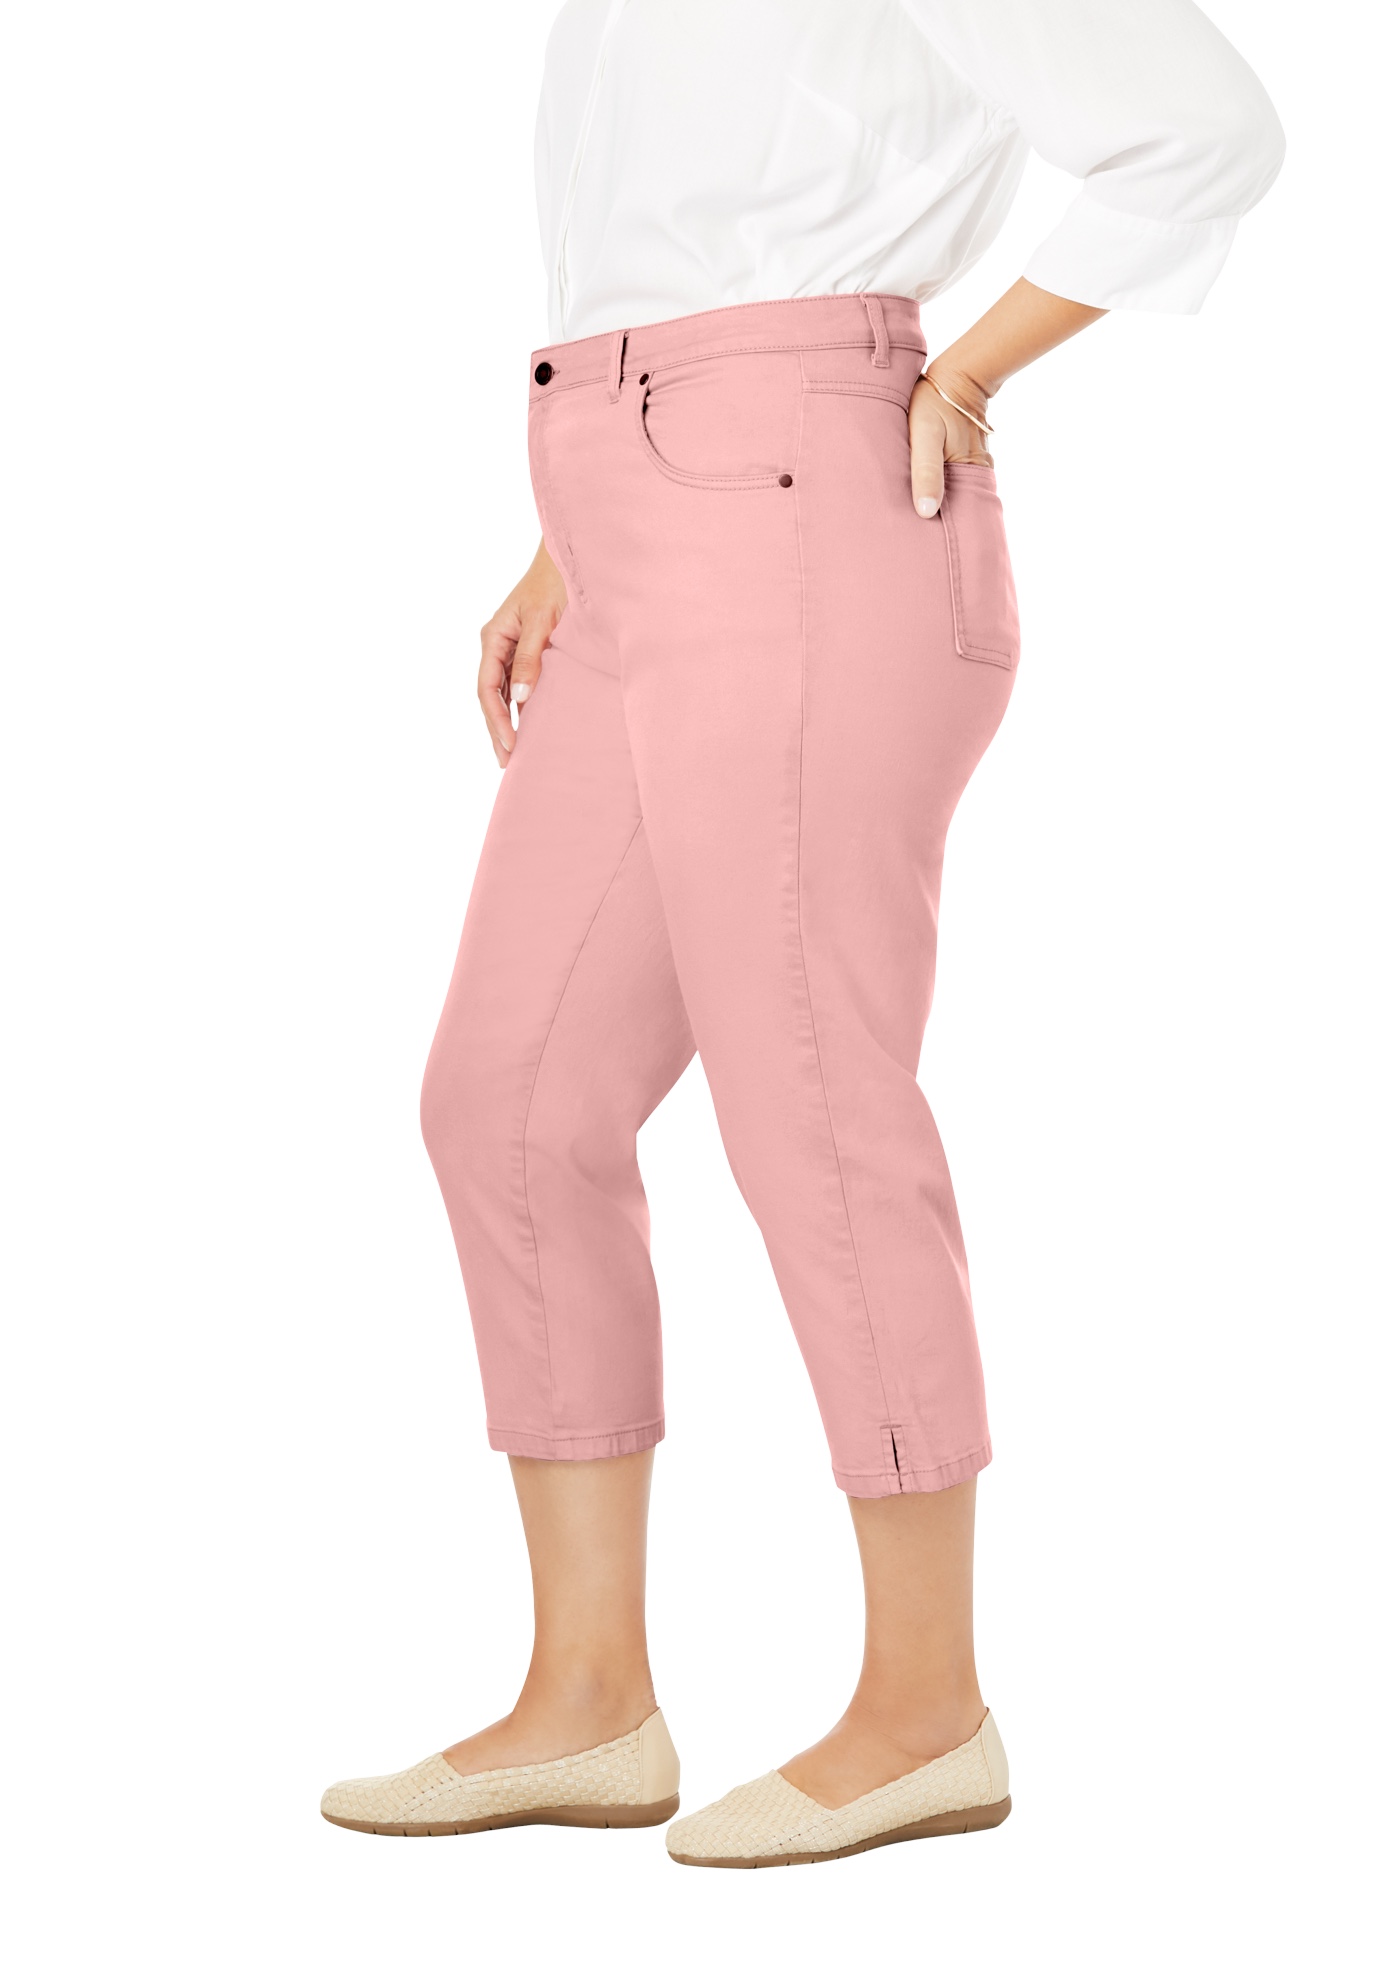 Woman Within Plus Size Capri Stretch Jean Jeans - image 3 of 4